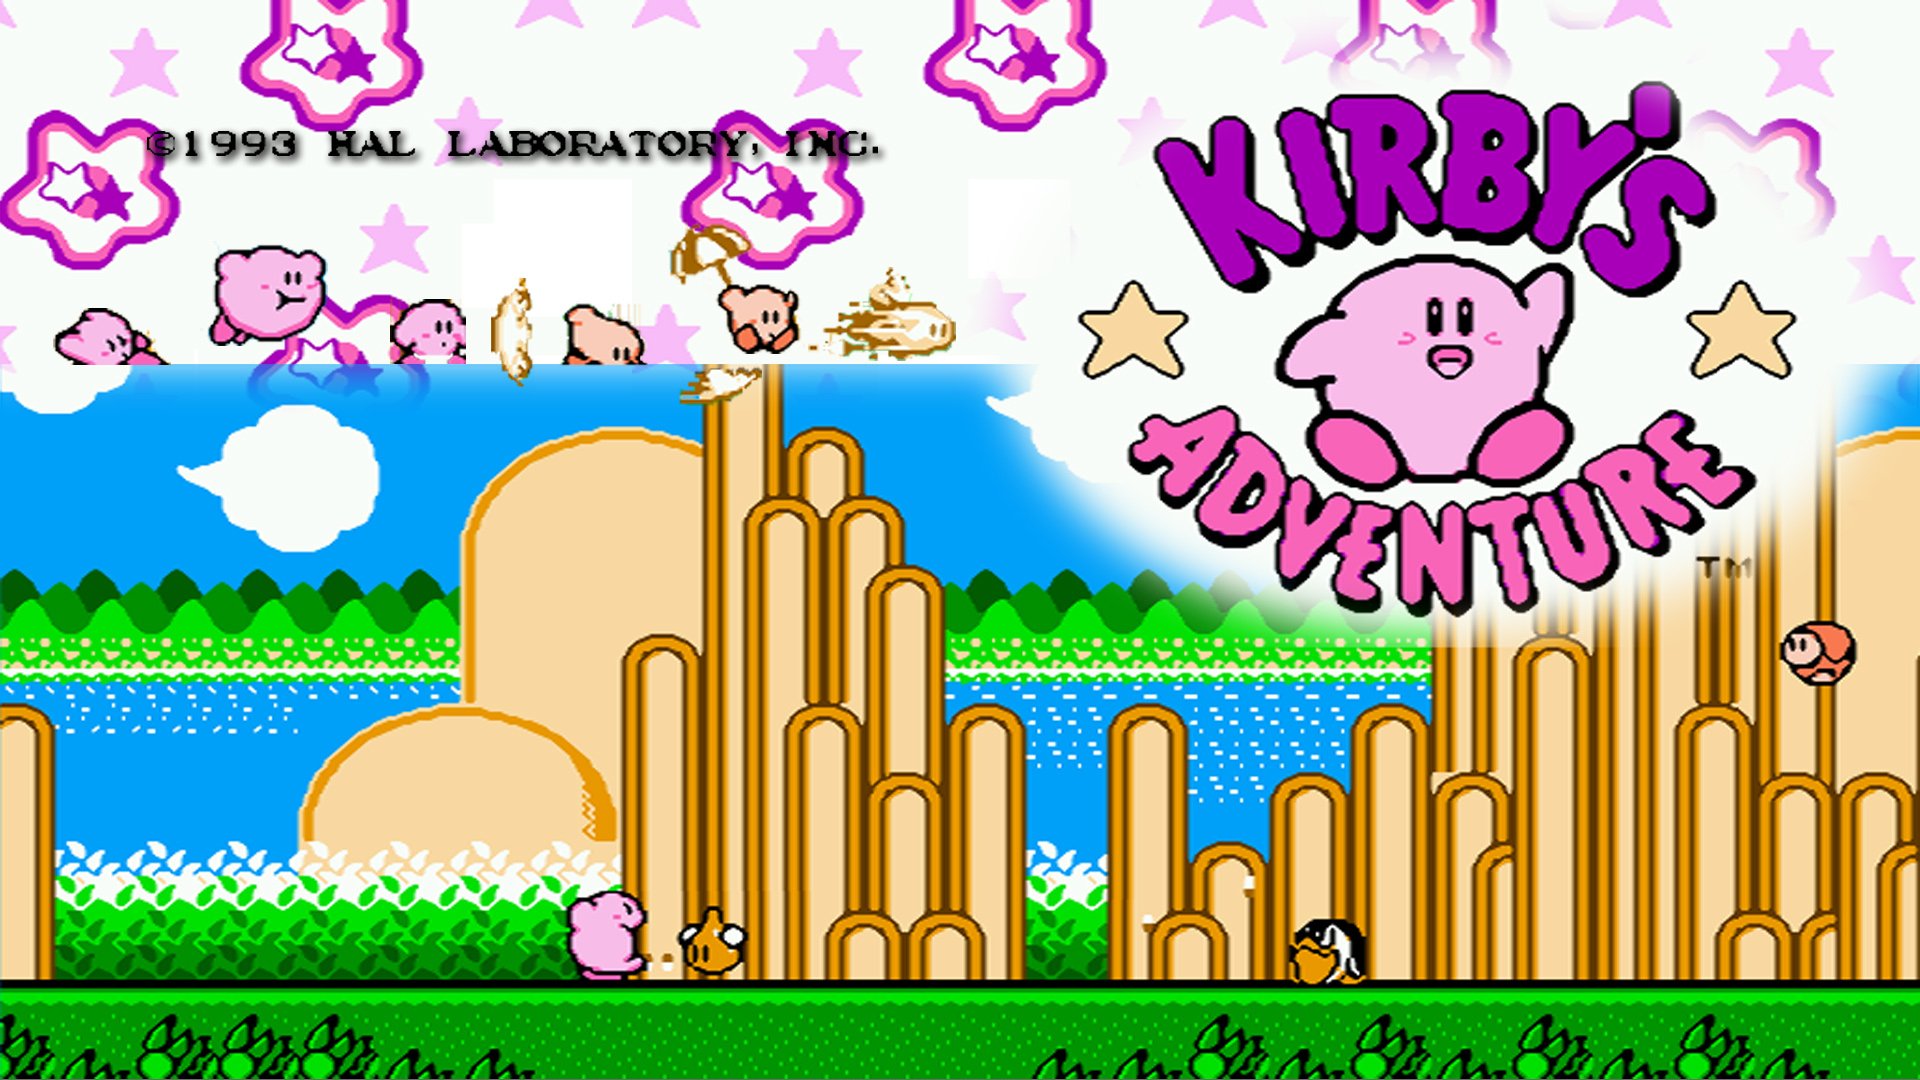 Kirby's Adventure HD Wallpapers and Backgrounds.